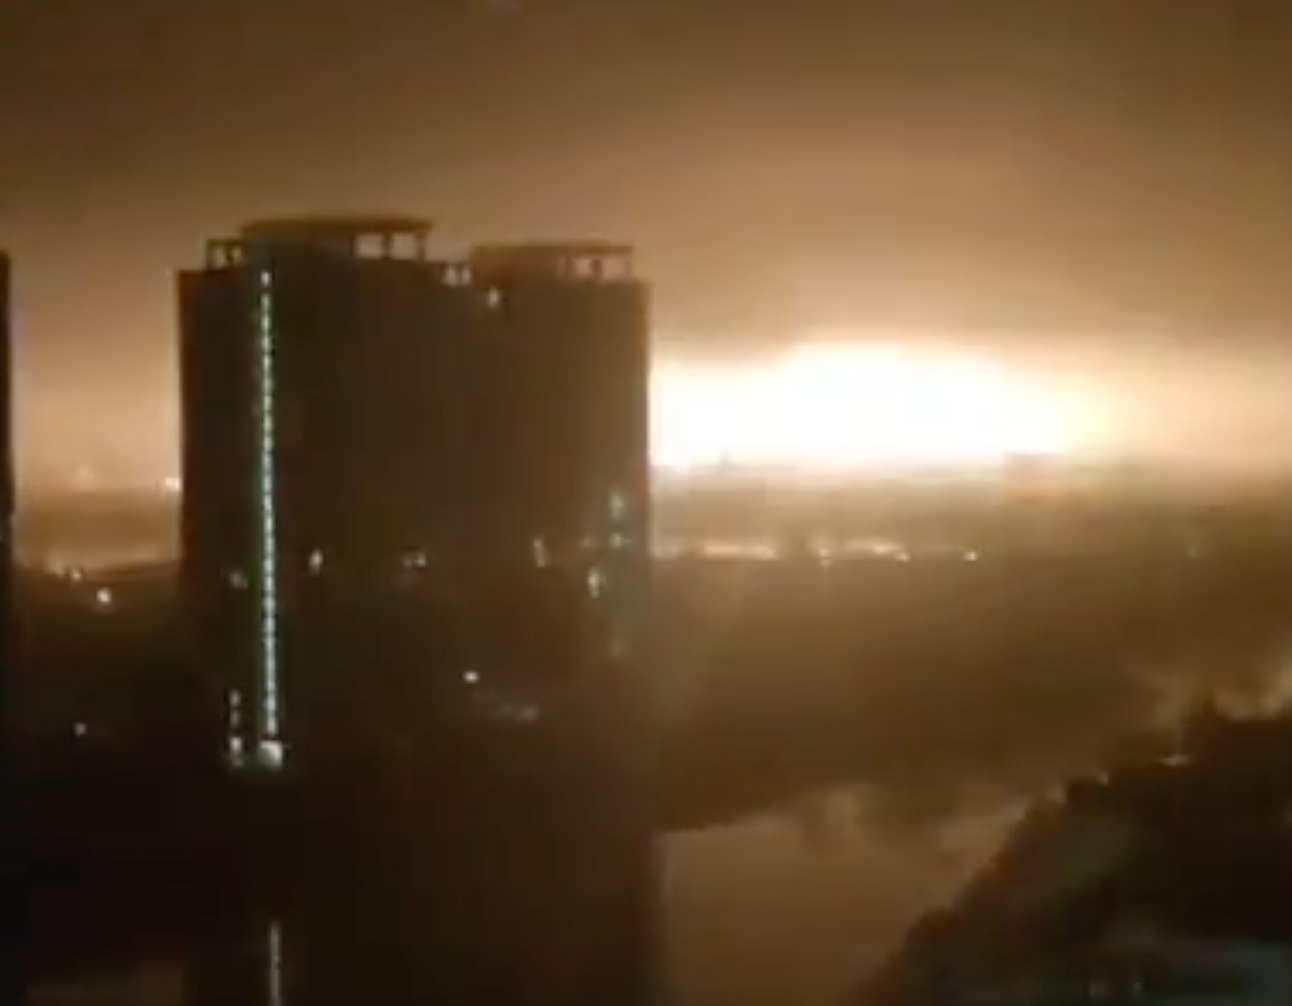 Footage shared on social media showed a large explosion lighting up the sky overnight